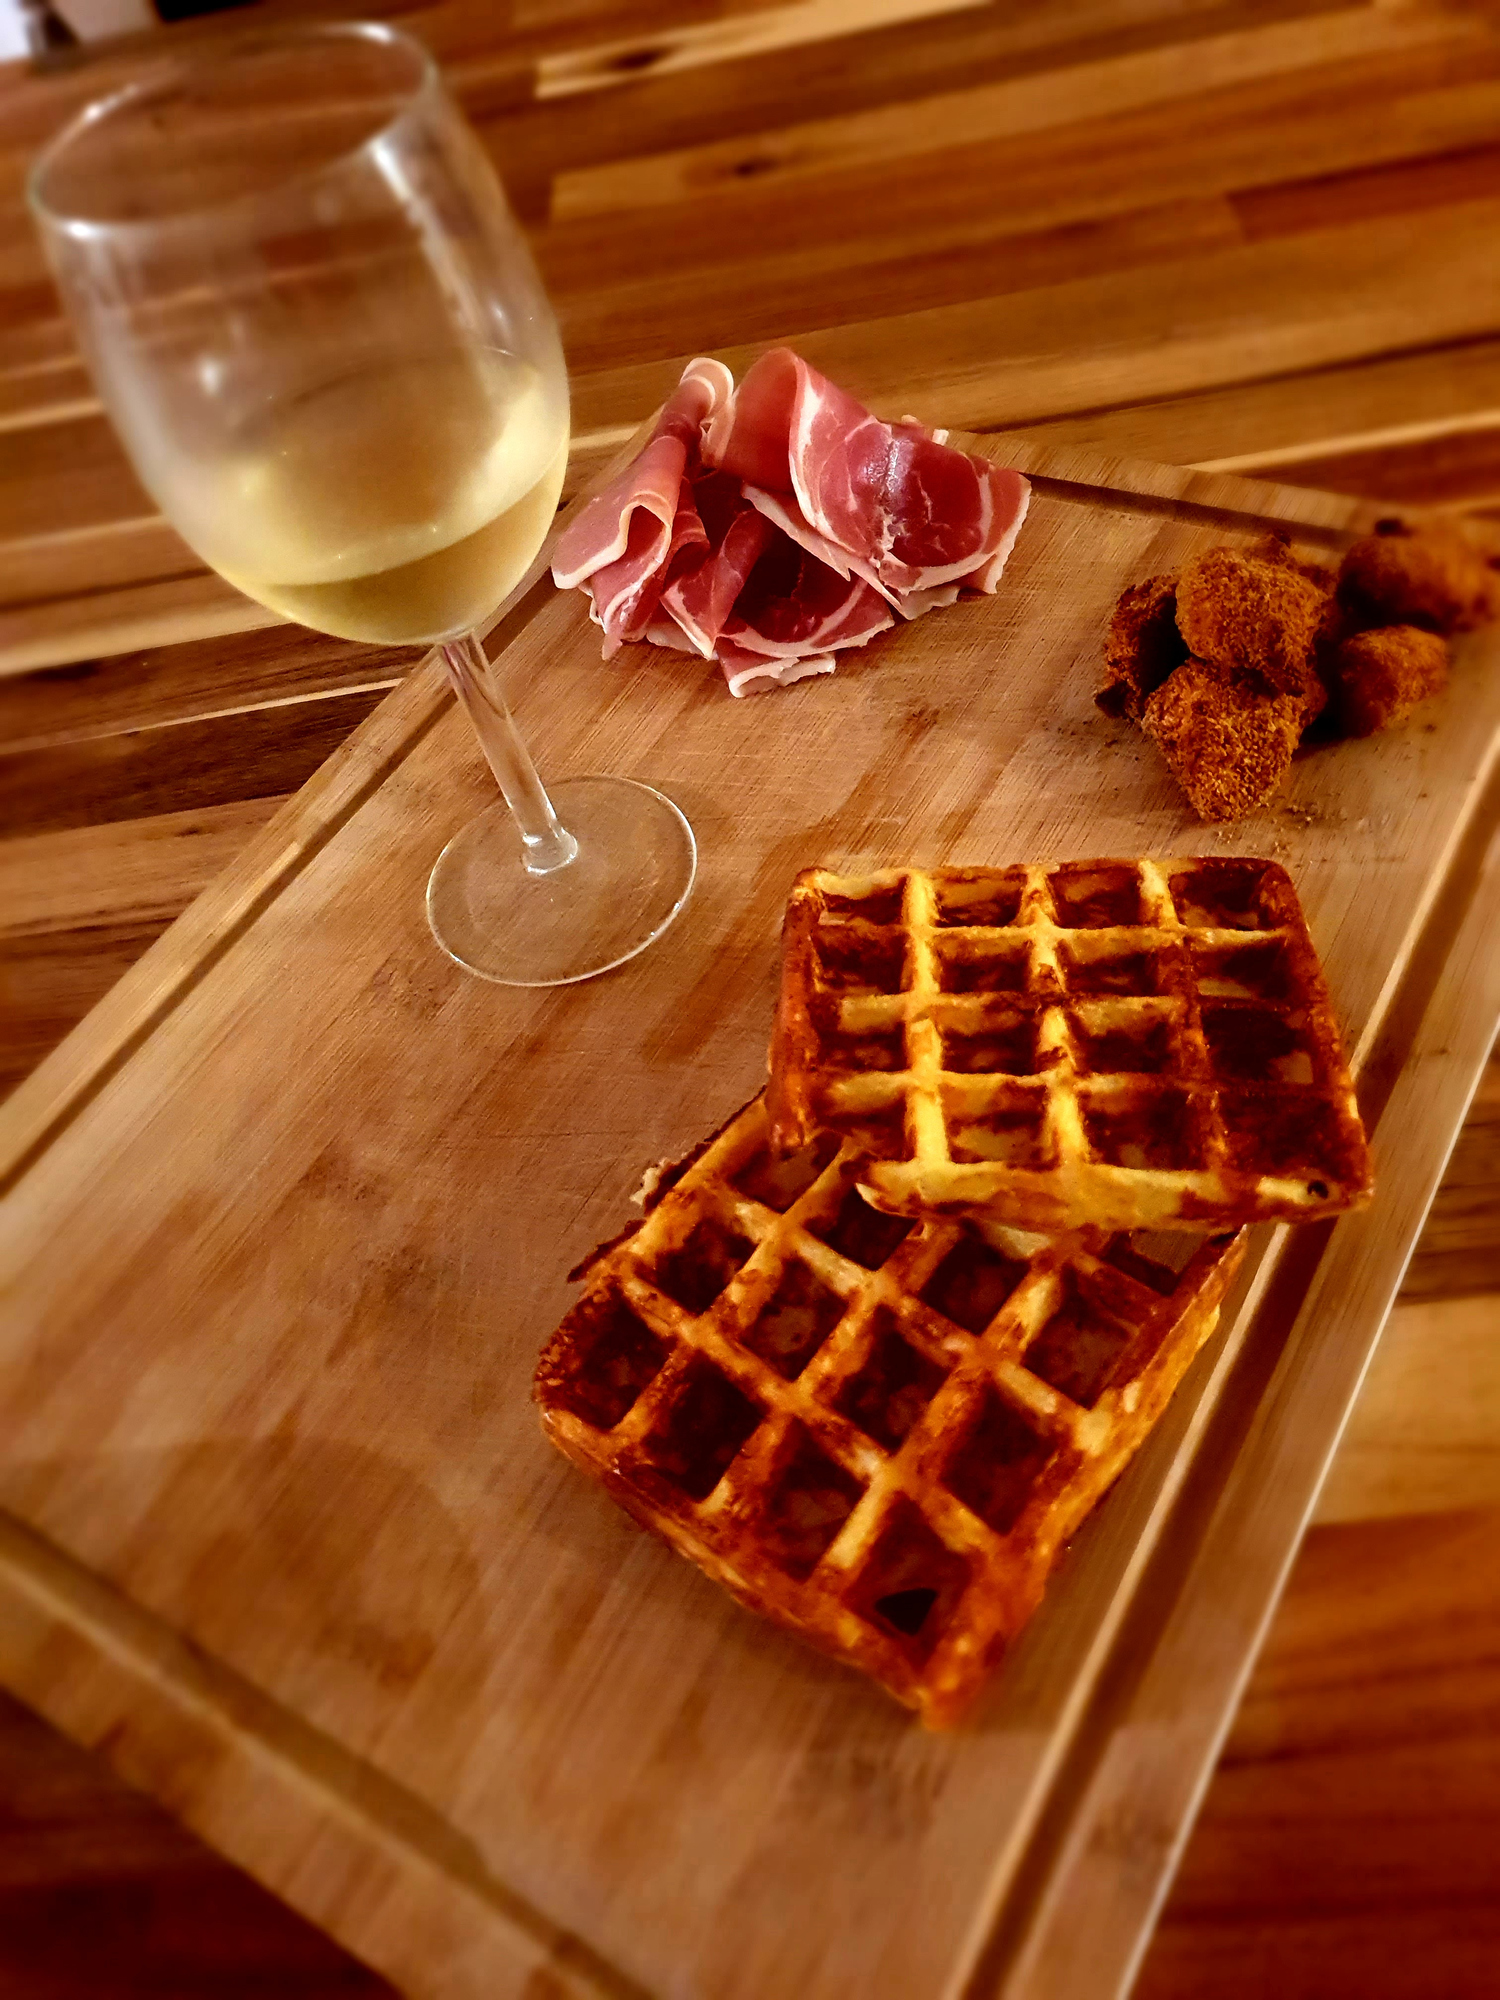 If you've never paired wine with waffles, now's the time